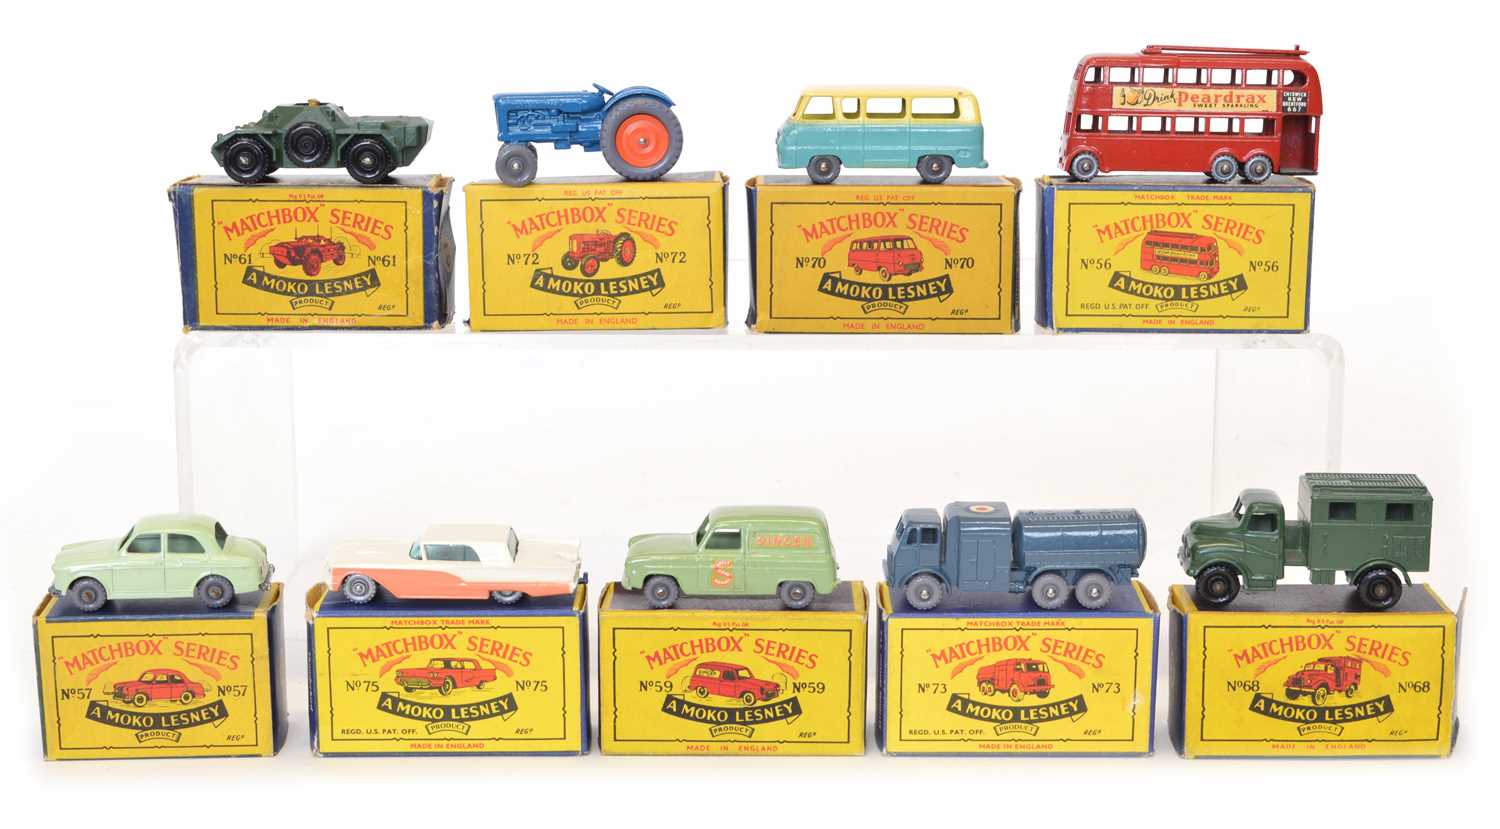 Lot 4 - 9 Moko Lesney Matchbox Series boxed cars and vehicles